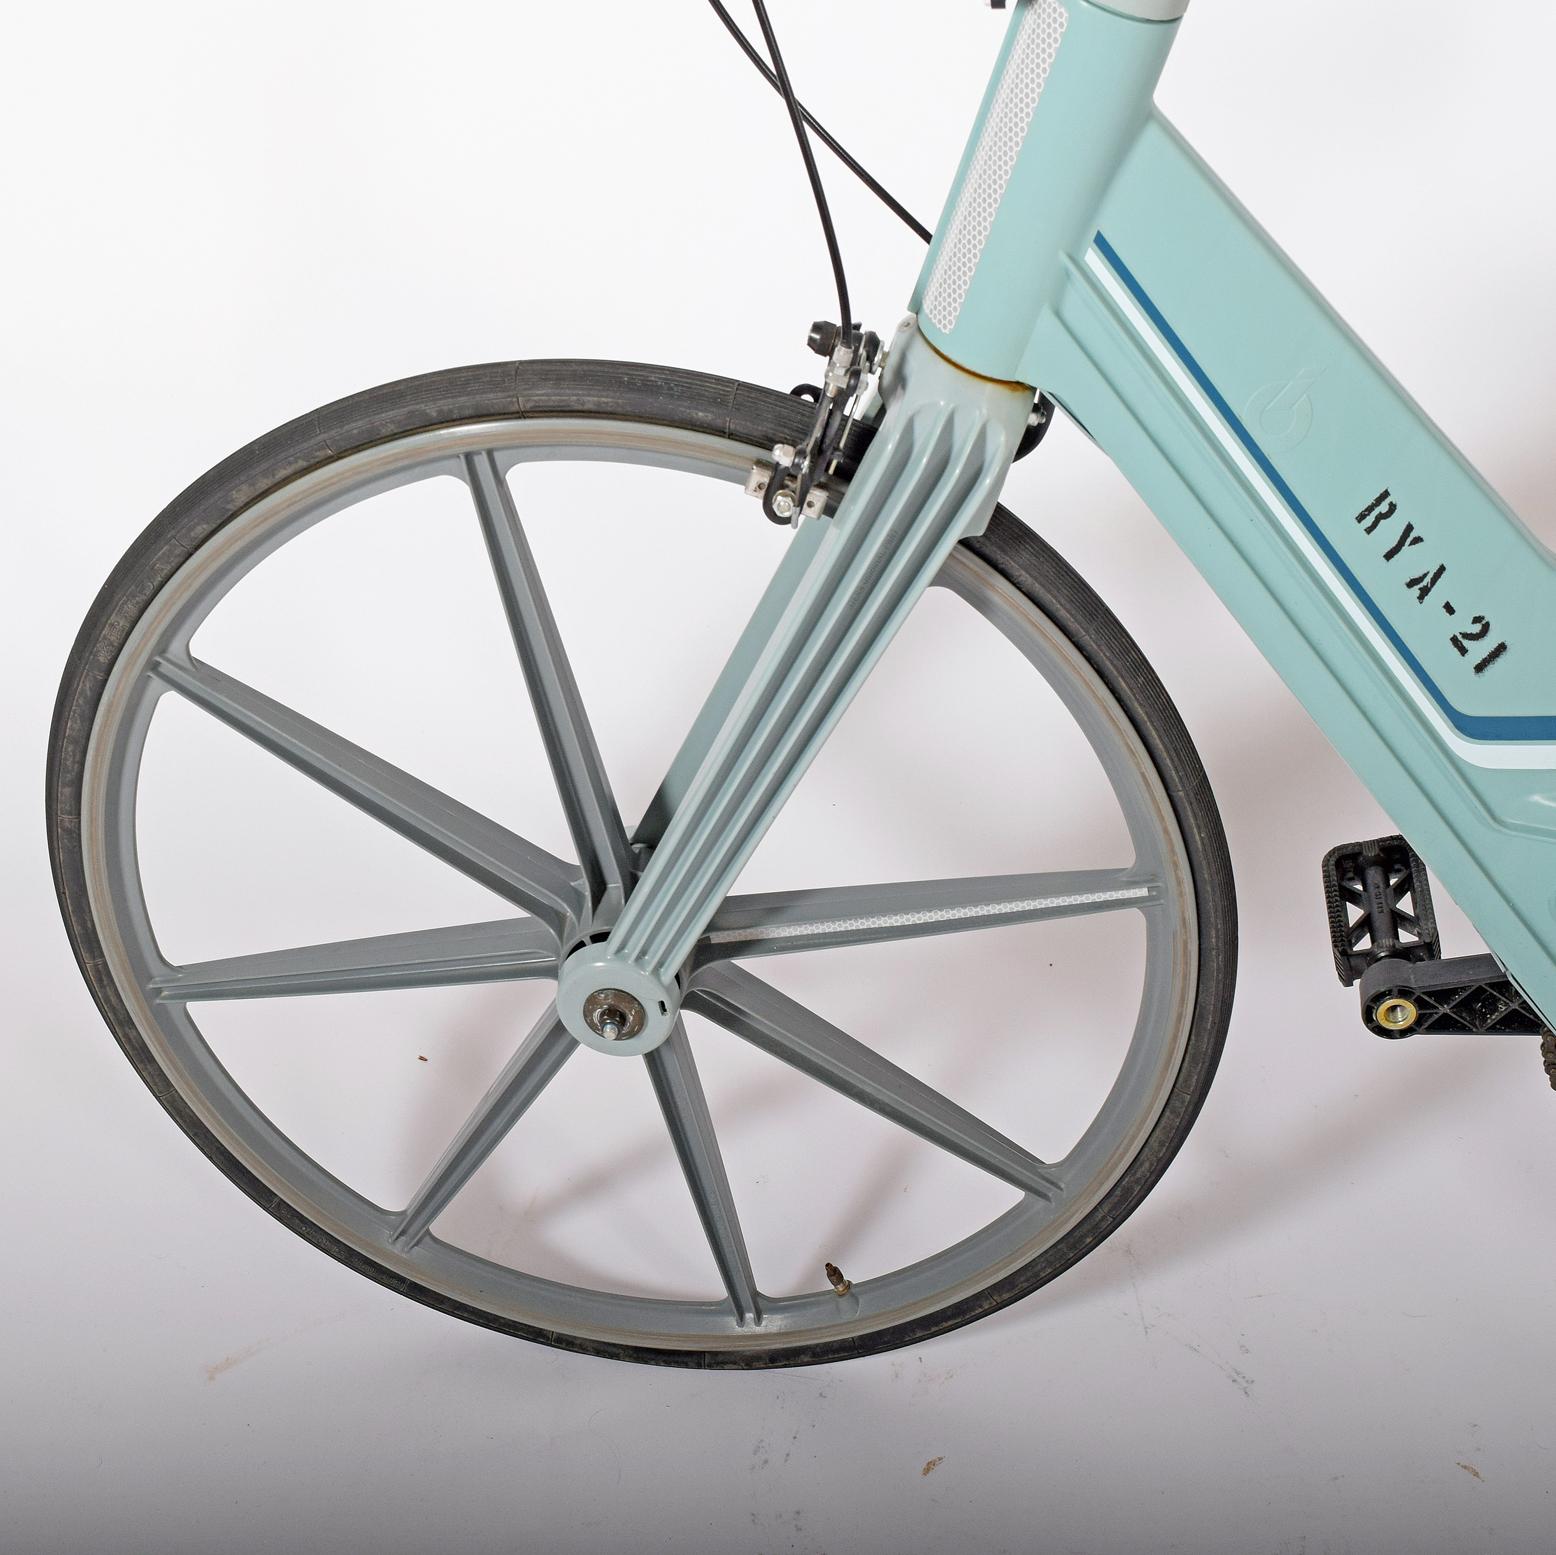 In response to the 1974 oil crisis, a small group of Swedish engineers obtained government funding to develop a bicycle completely composed of fiber-reinforced composite plastics (FRP). By 1980, the Itera Development Center AB was designing,